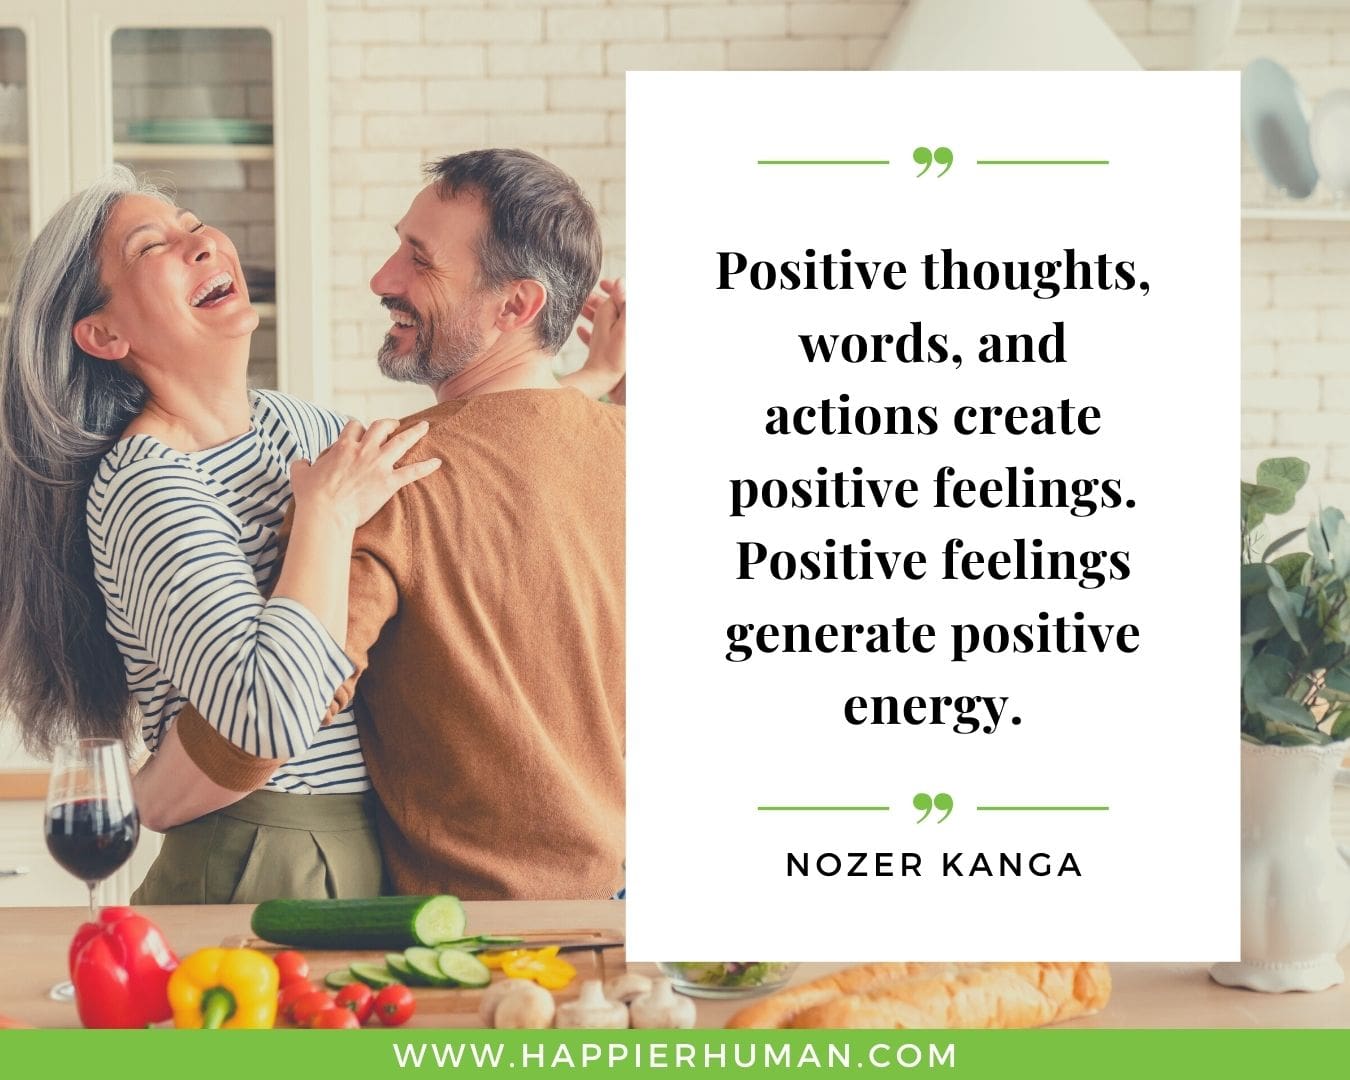 Positive Energy Quotes - “Positive thoughts, words, and actions create positive feelings. Positive feelings generate positive energy.” - Nozer Kanga